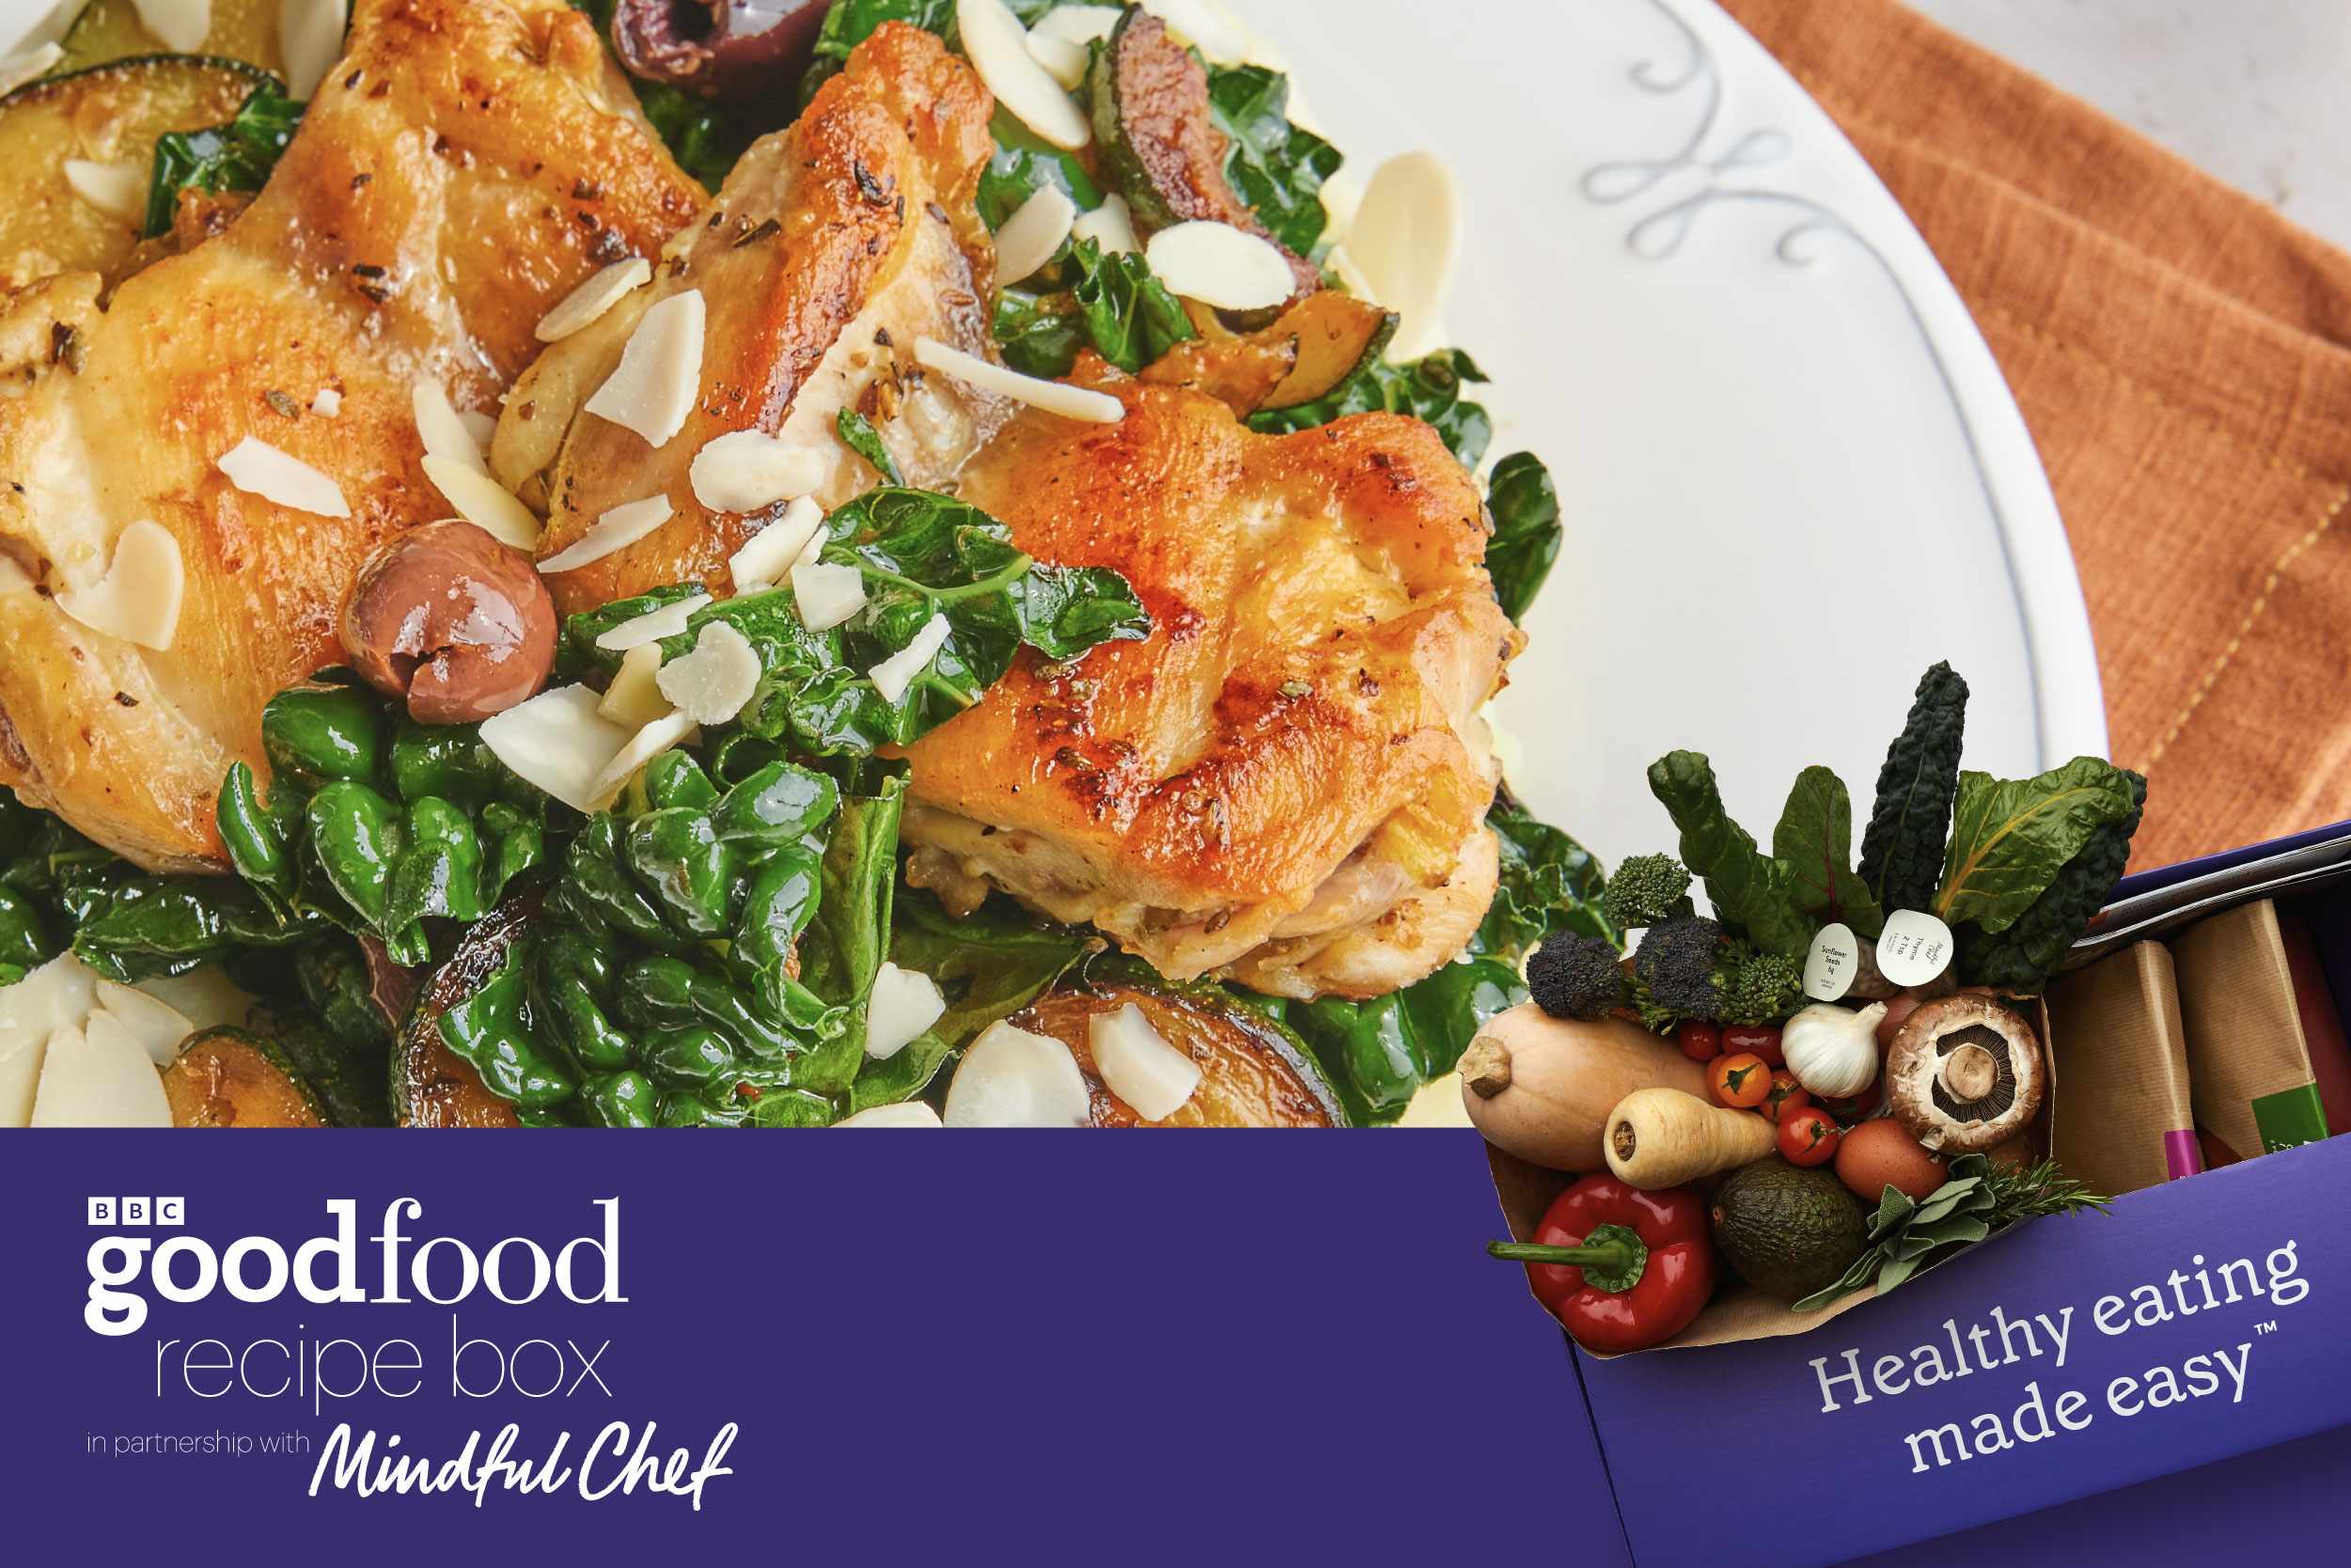 Good Food Mindful Chef promotional image featuring a chicken dish with olives and greens